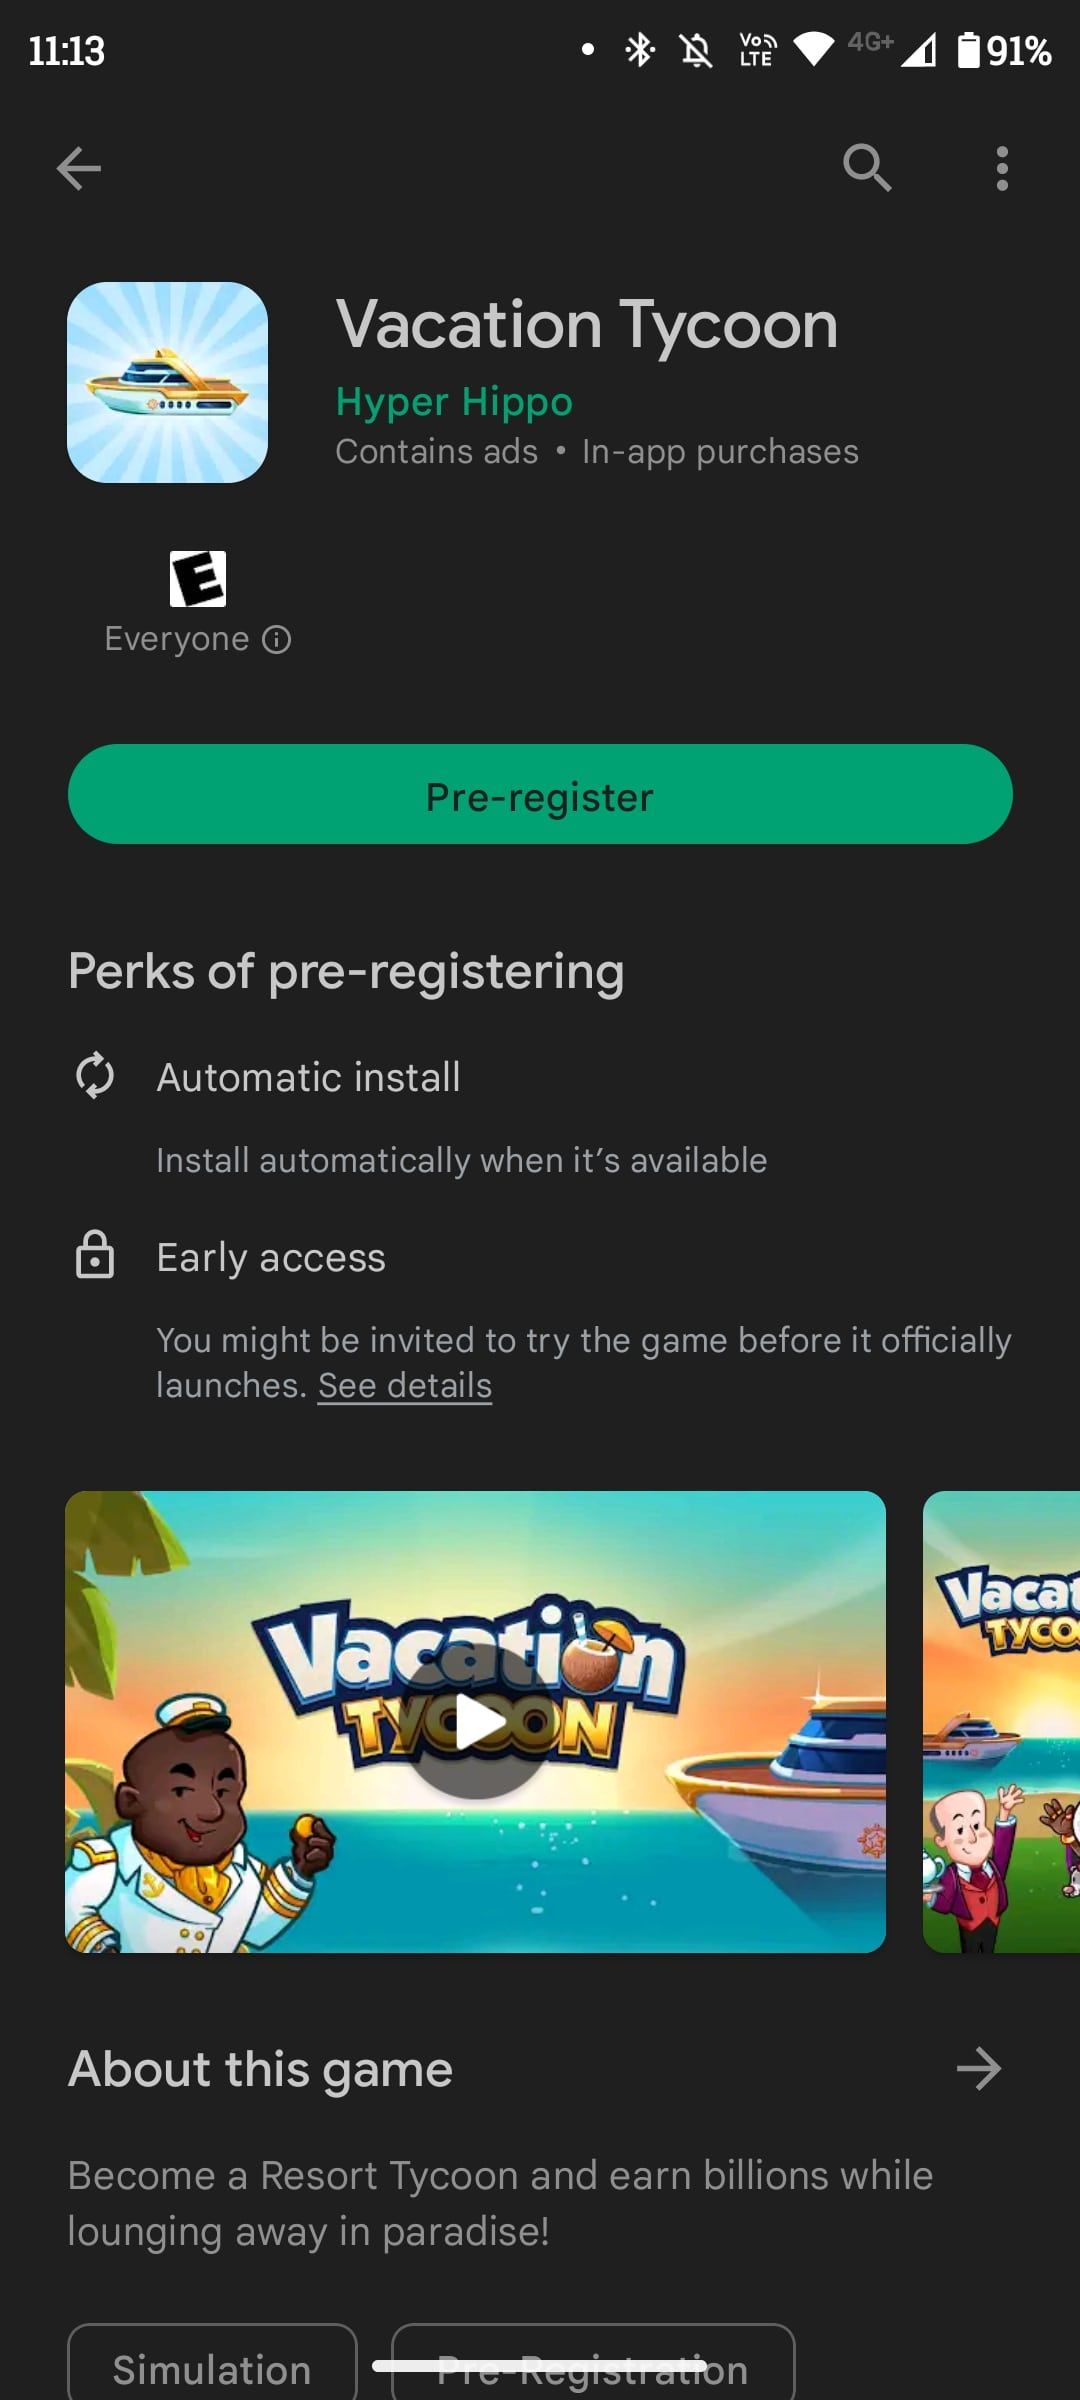 Vacation Tycoon app store page with perks